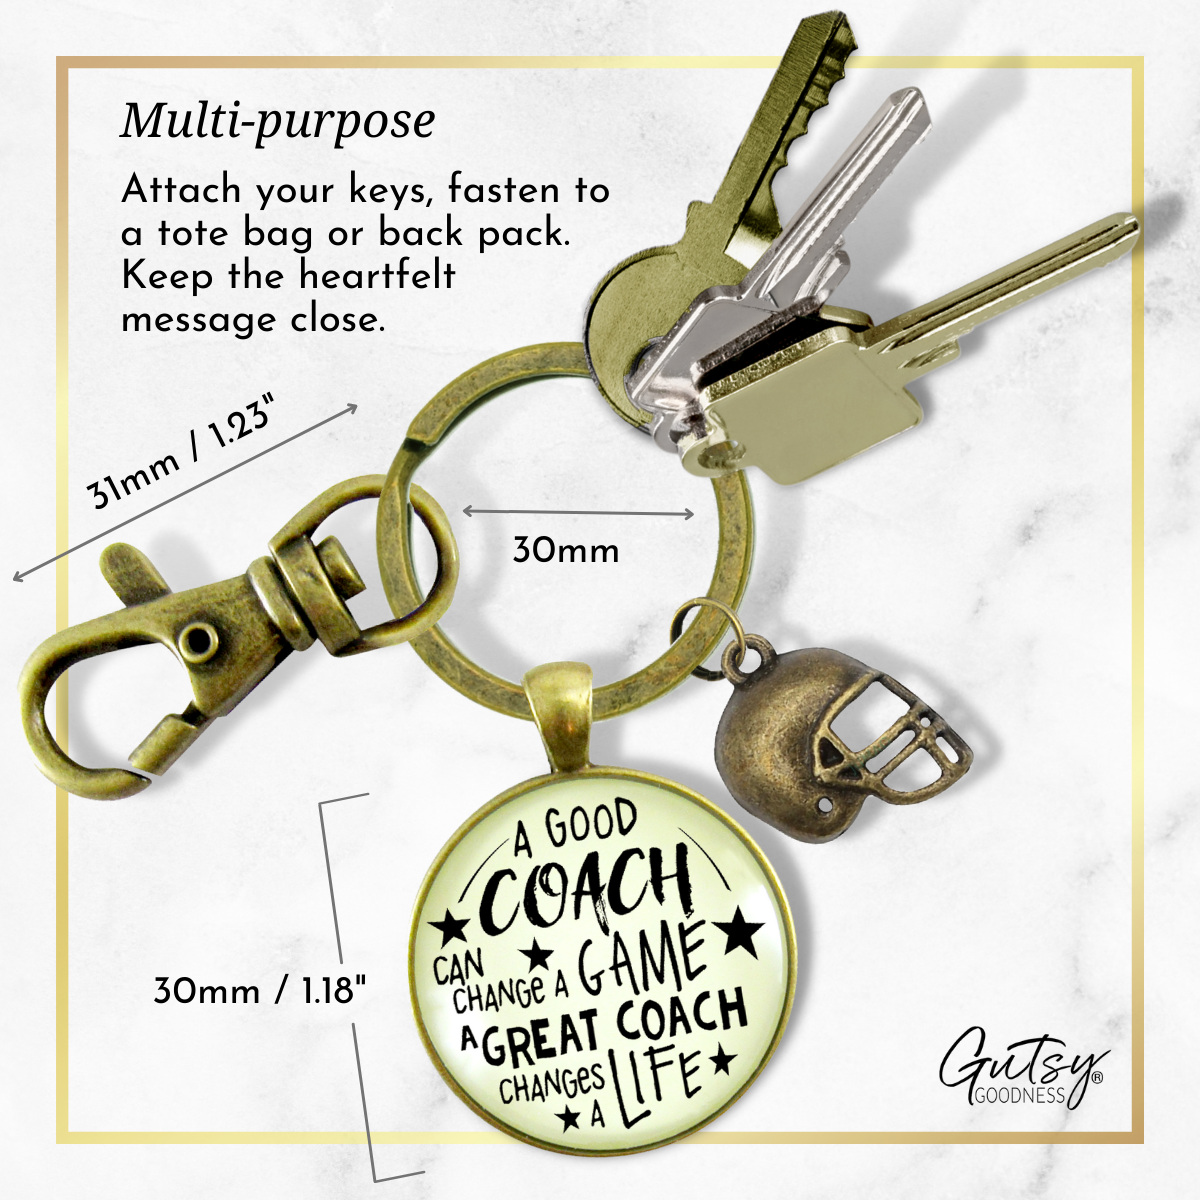 Football Coaching Sport Keychain Great Coach Changes Life Thank You Gift - Gutsy Goodness Handmade Jewelry;Football Coaching Sport Keychain Great Coach Changes Life Thank You Gift - Gutsy Goodness Handmade Jewelry Gifts